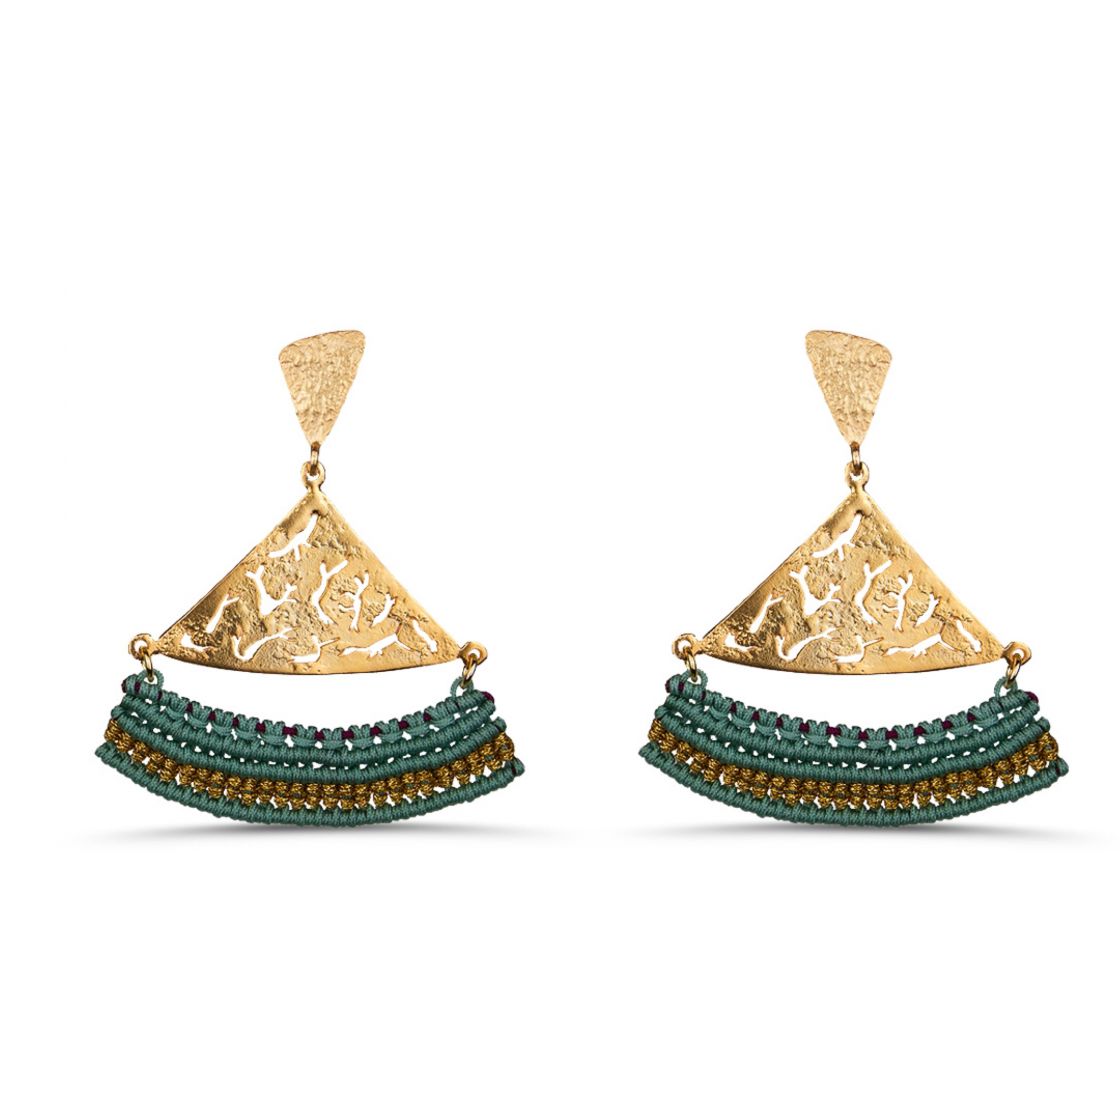 Ethnic earrings capture the essence of time, pairing a cutout prehistoric animals with a beautiful macrame detail. (height 6cm - width 5cm)